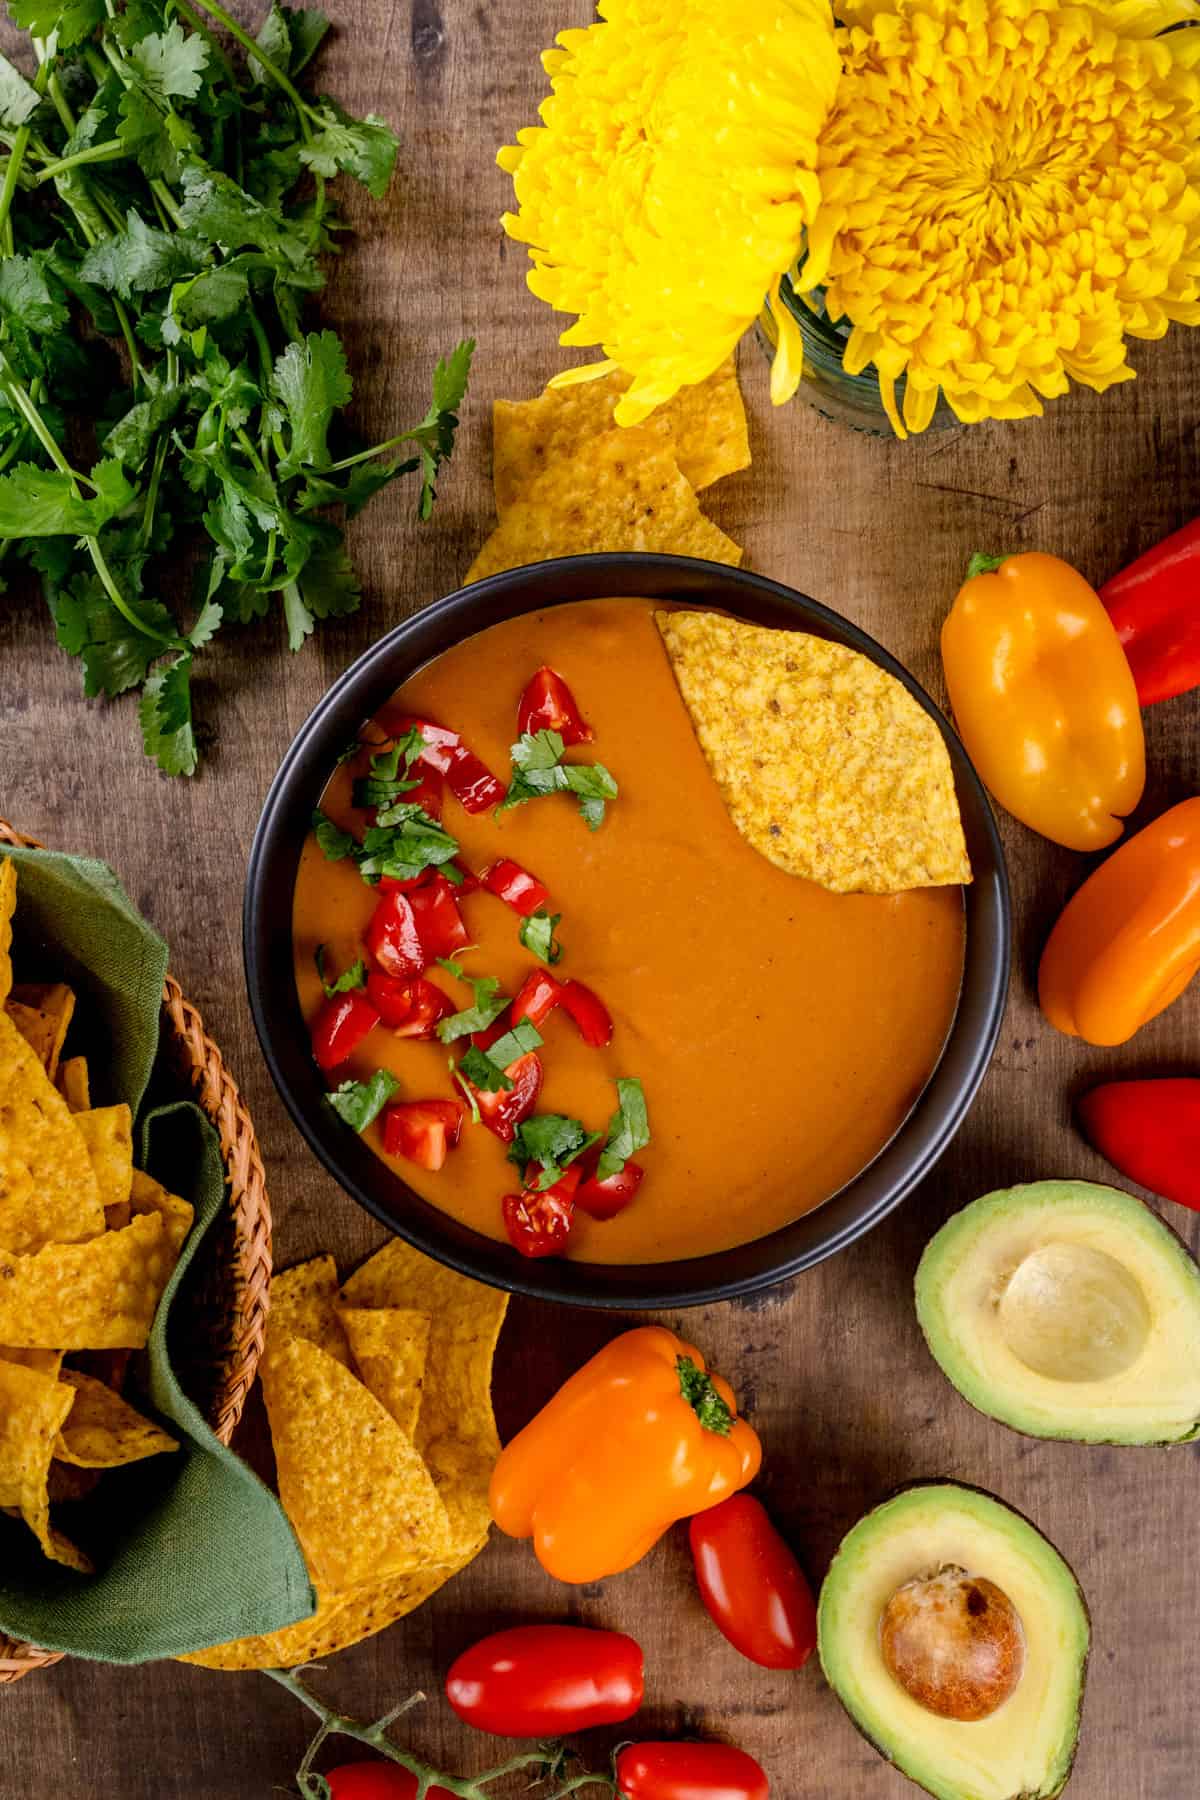 A dark bowl is filled with dairy free quest. Fresh tomato and cilantro are on top of the quest. A yellow corn chip is tucked in the side of the bowl. More chips, peppers, avocados, fresh cilantro, and fresh flowers surround the bowl.